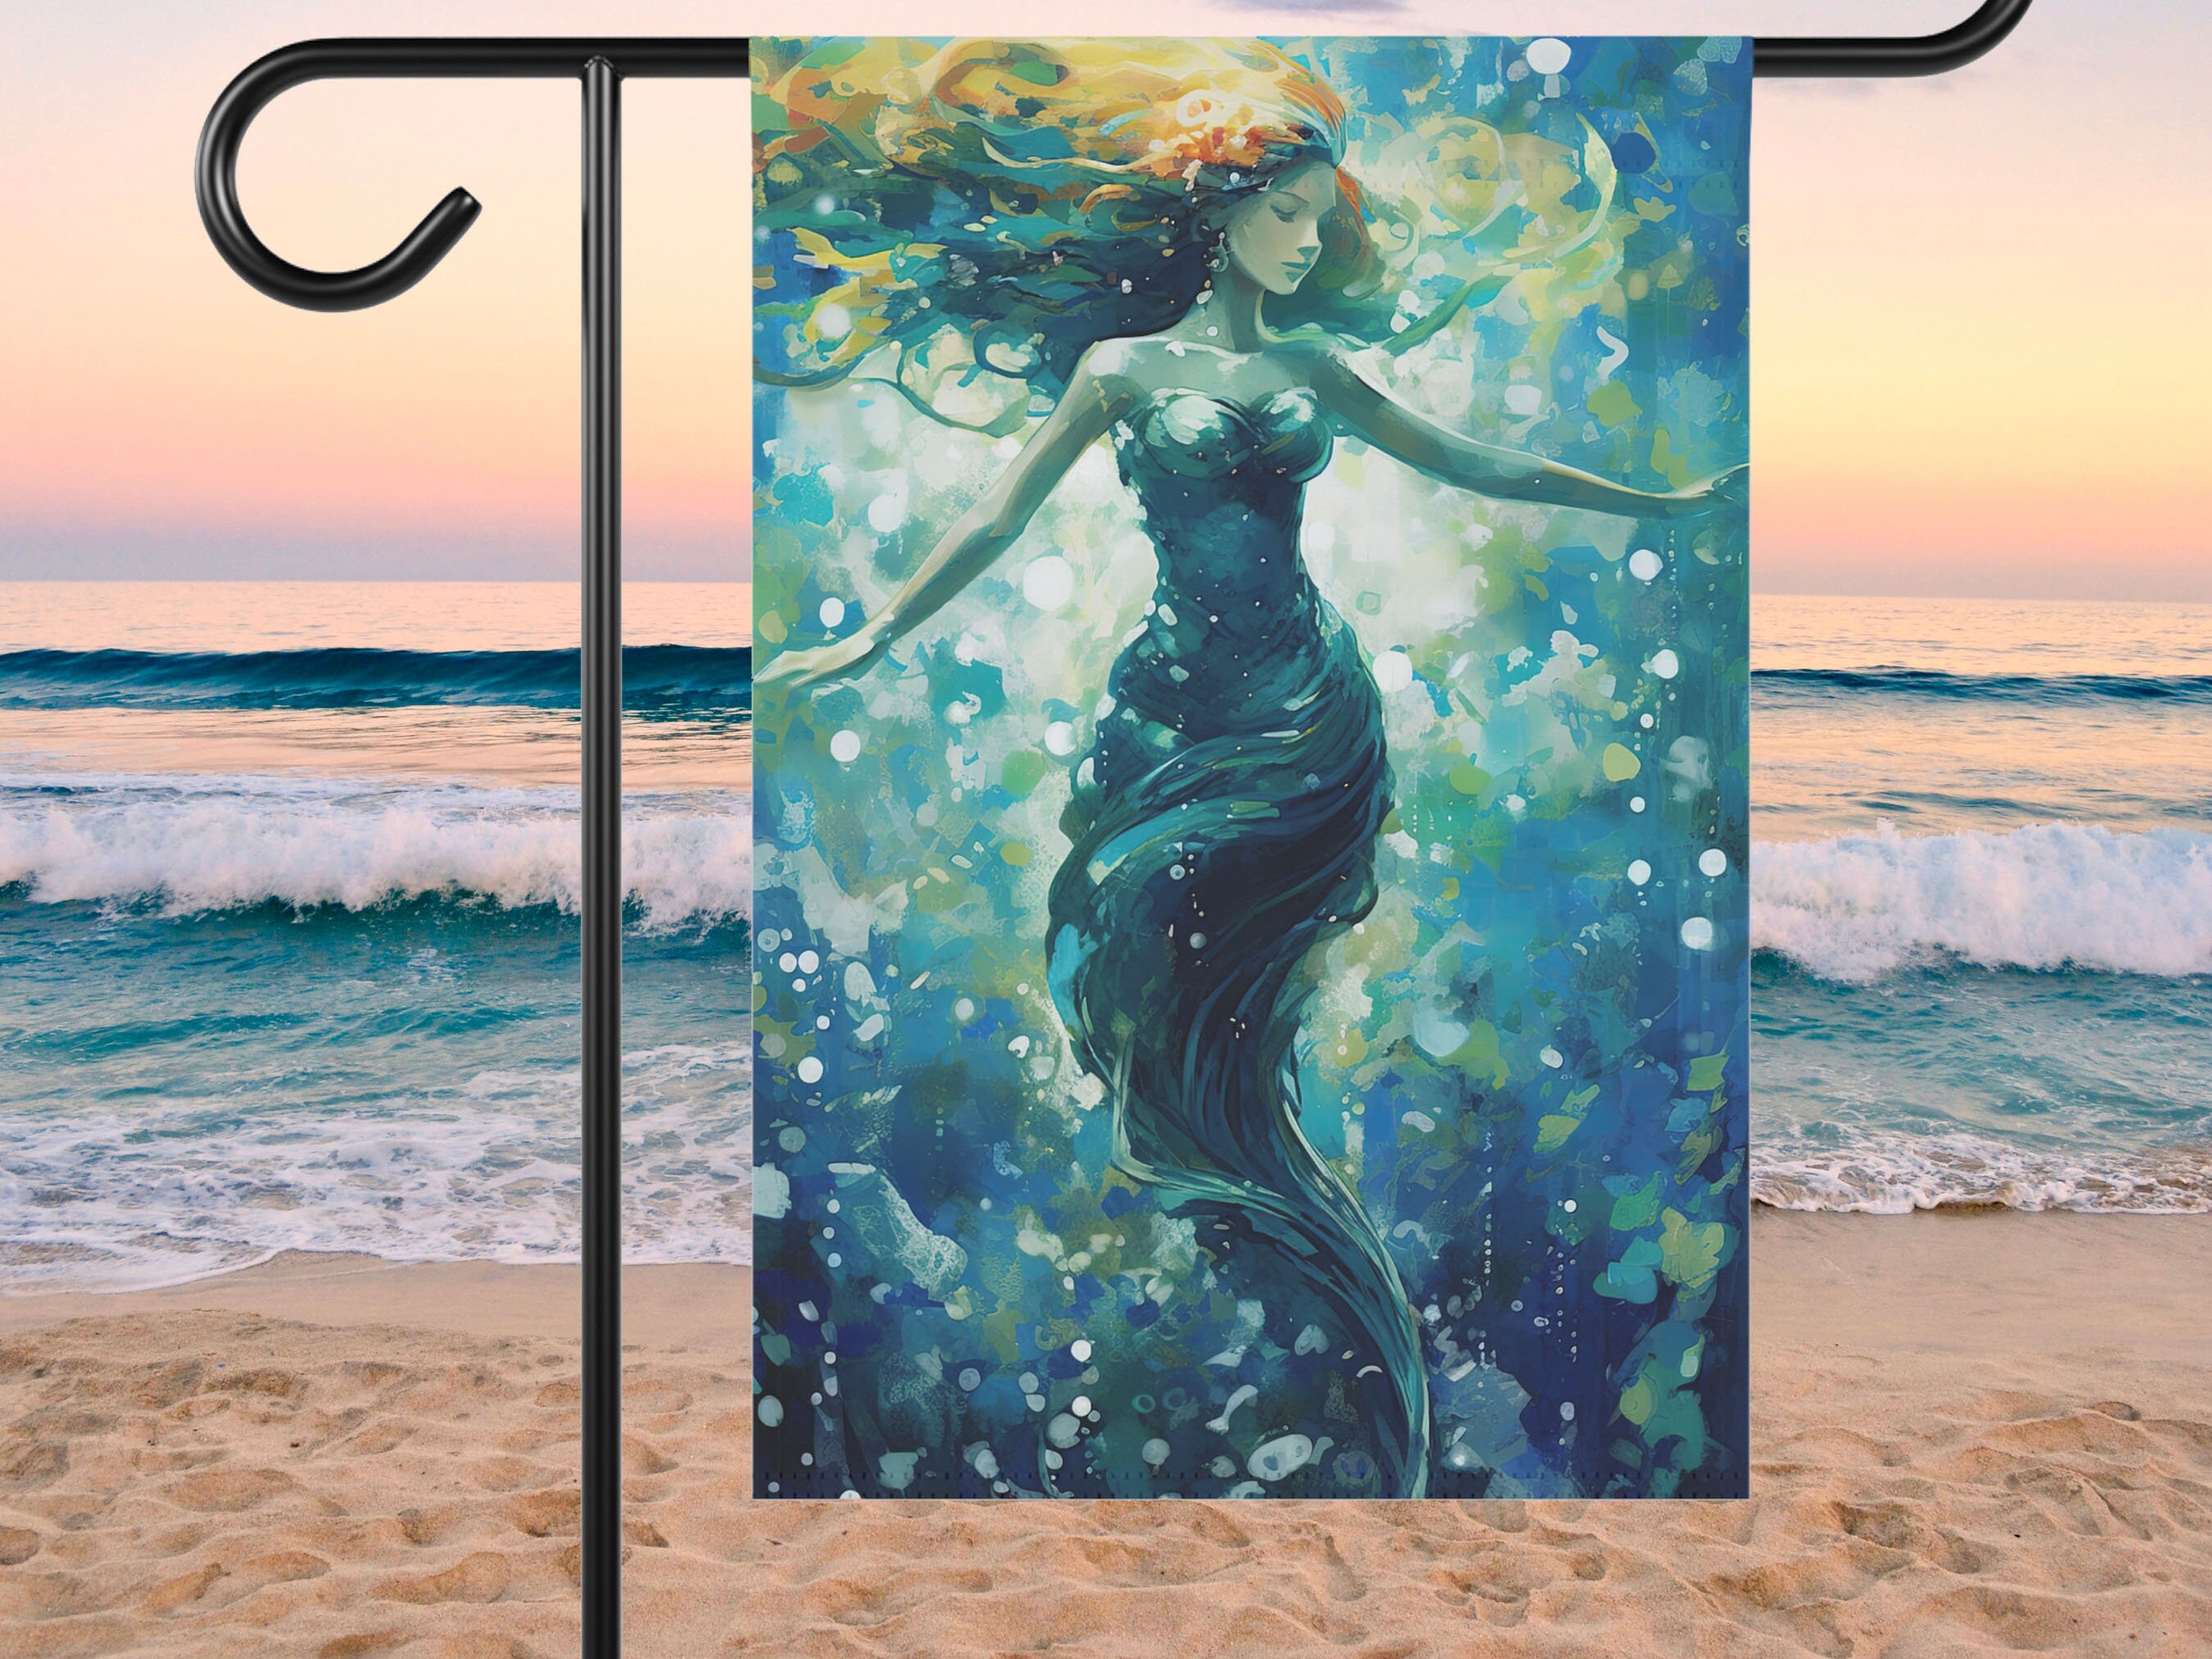 Vibrant Colorful Beach Painting with Woman in One-Piece and Shells Fantasy  Art - Canvas Print